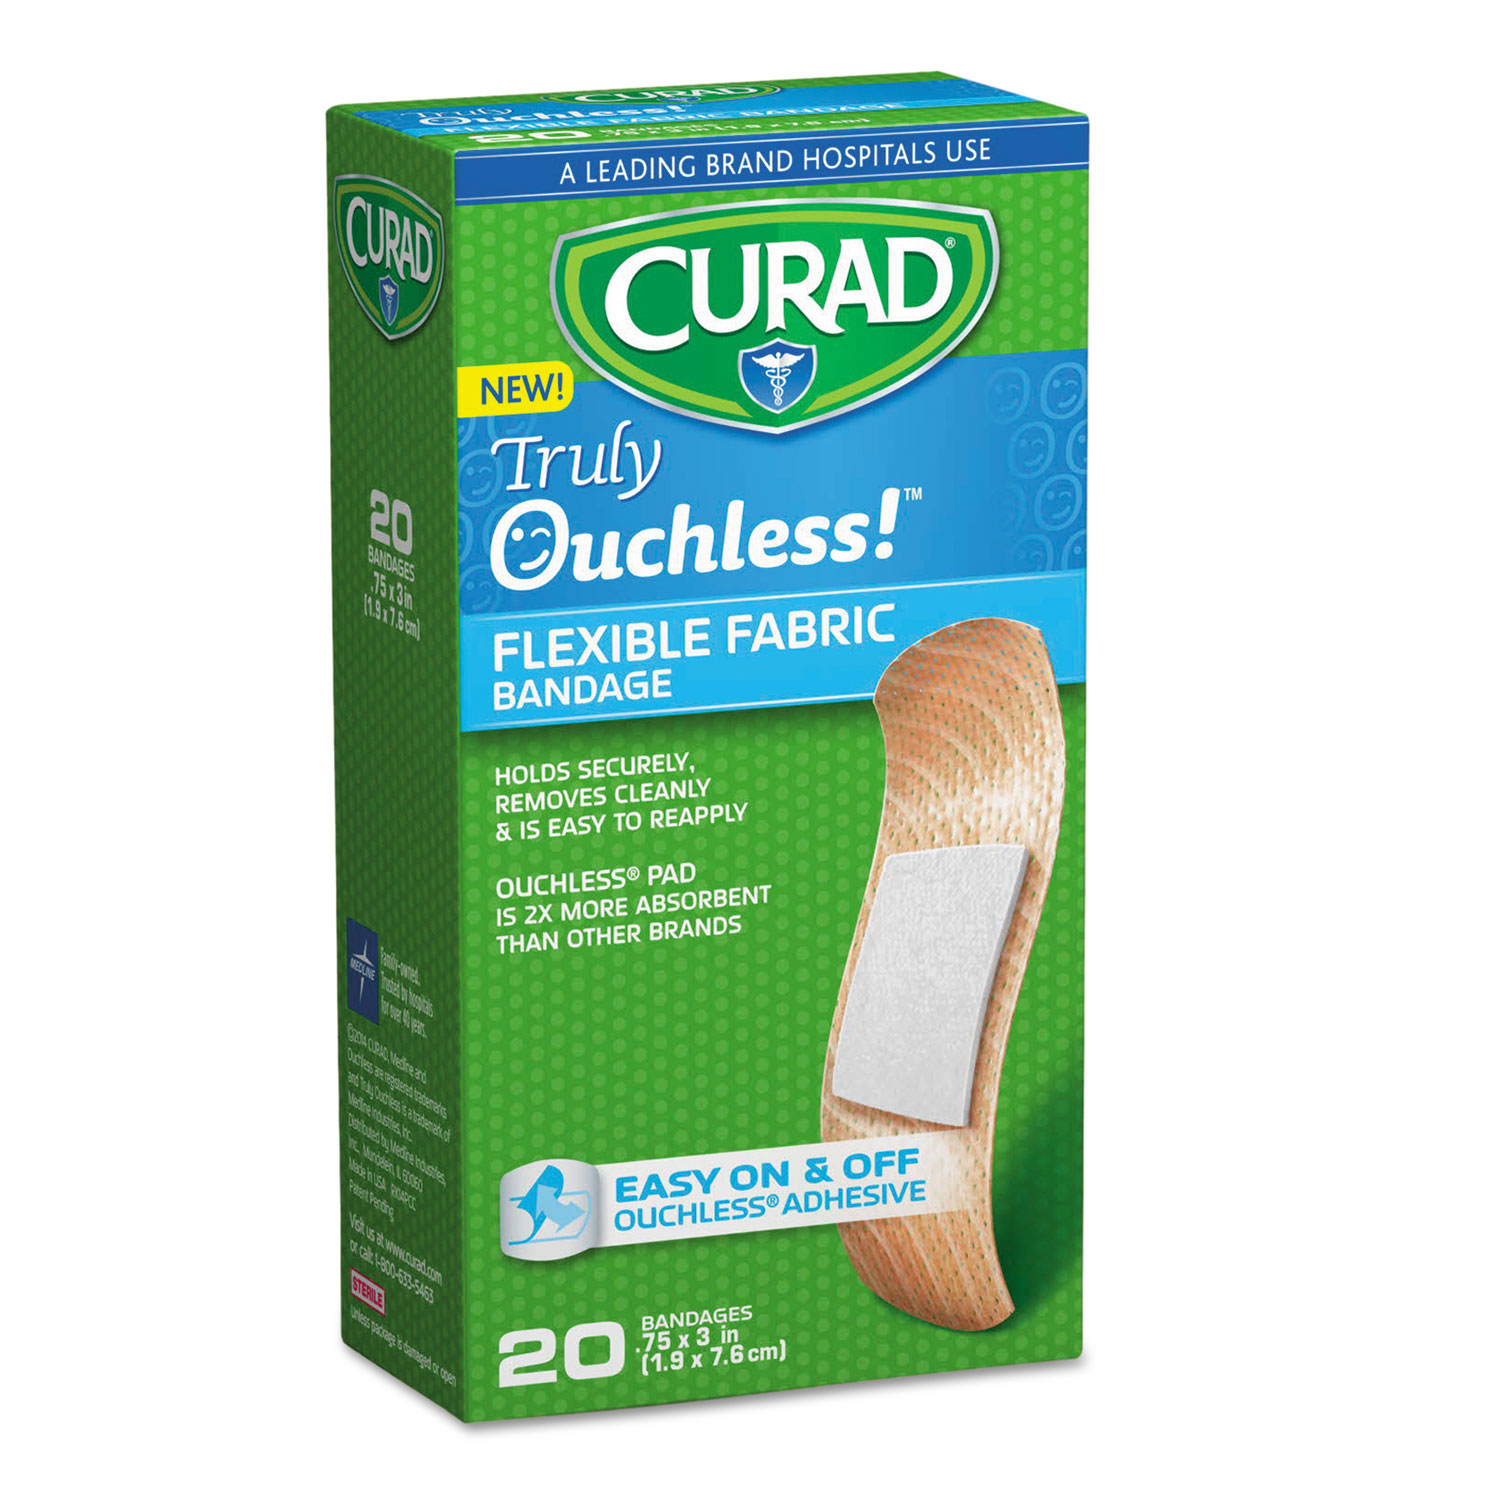 Ouchless Flex Fabric Bandages, 3/4 x 3, 20/Box